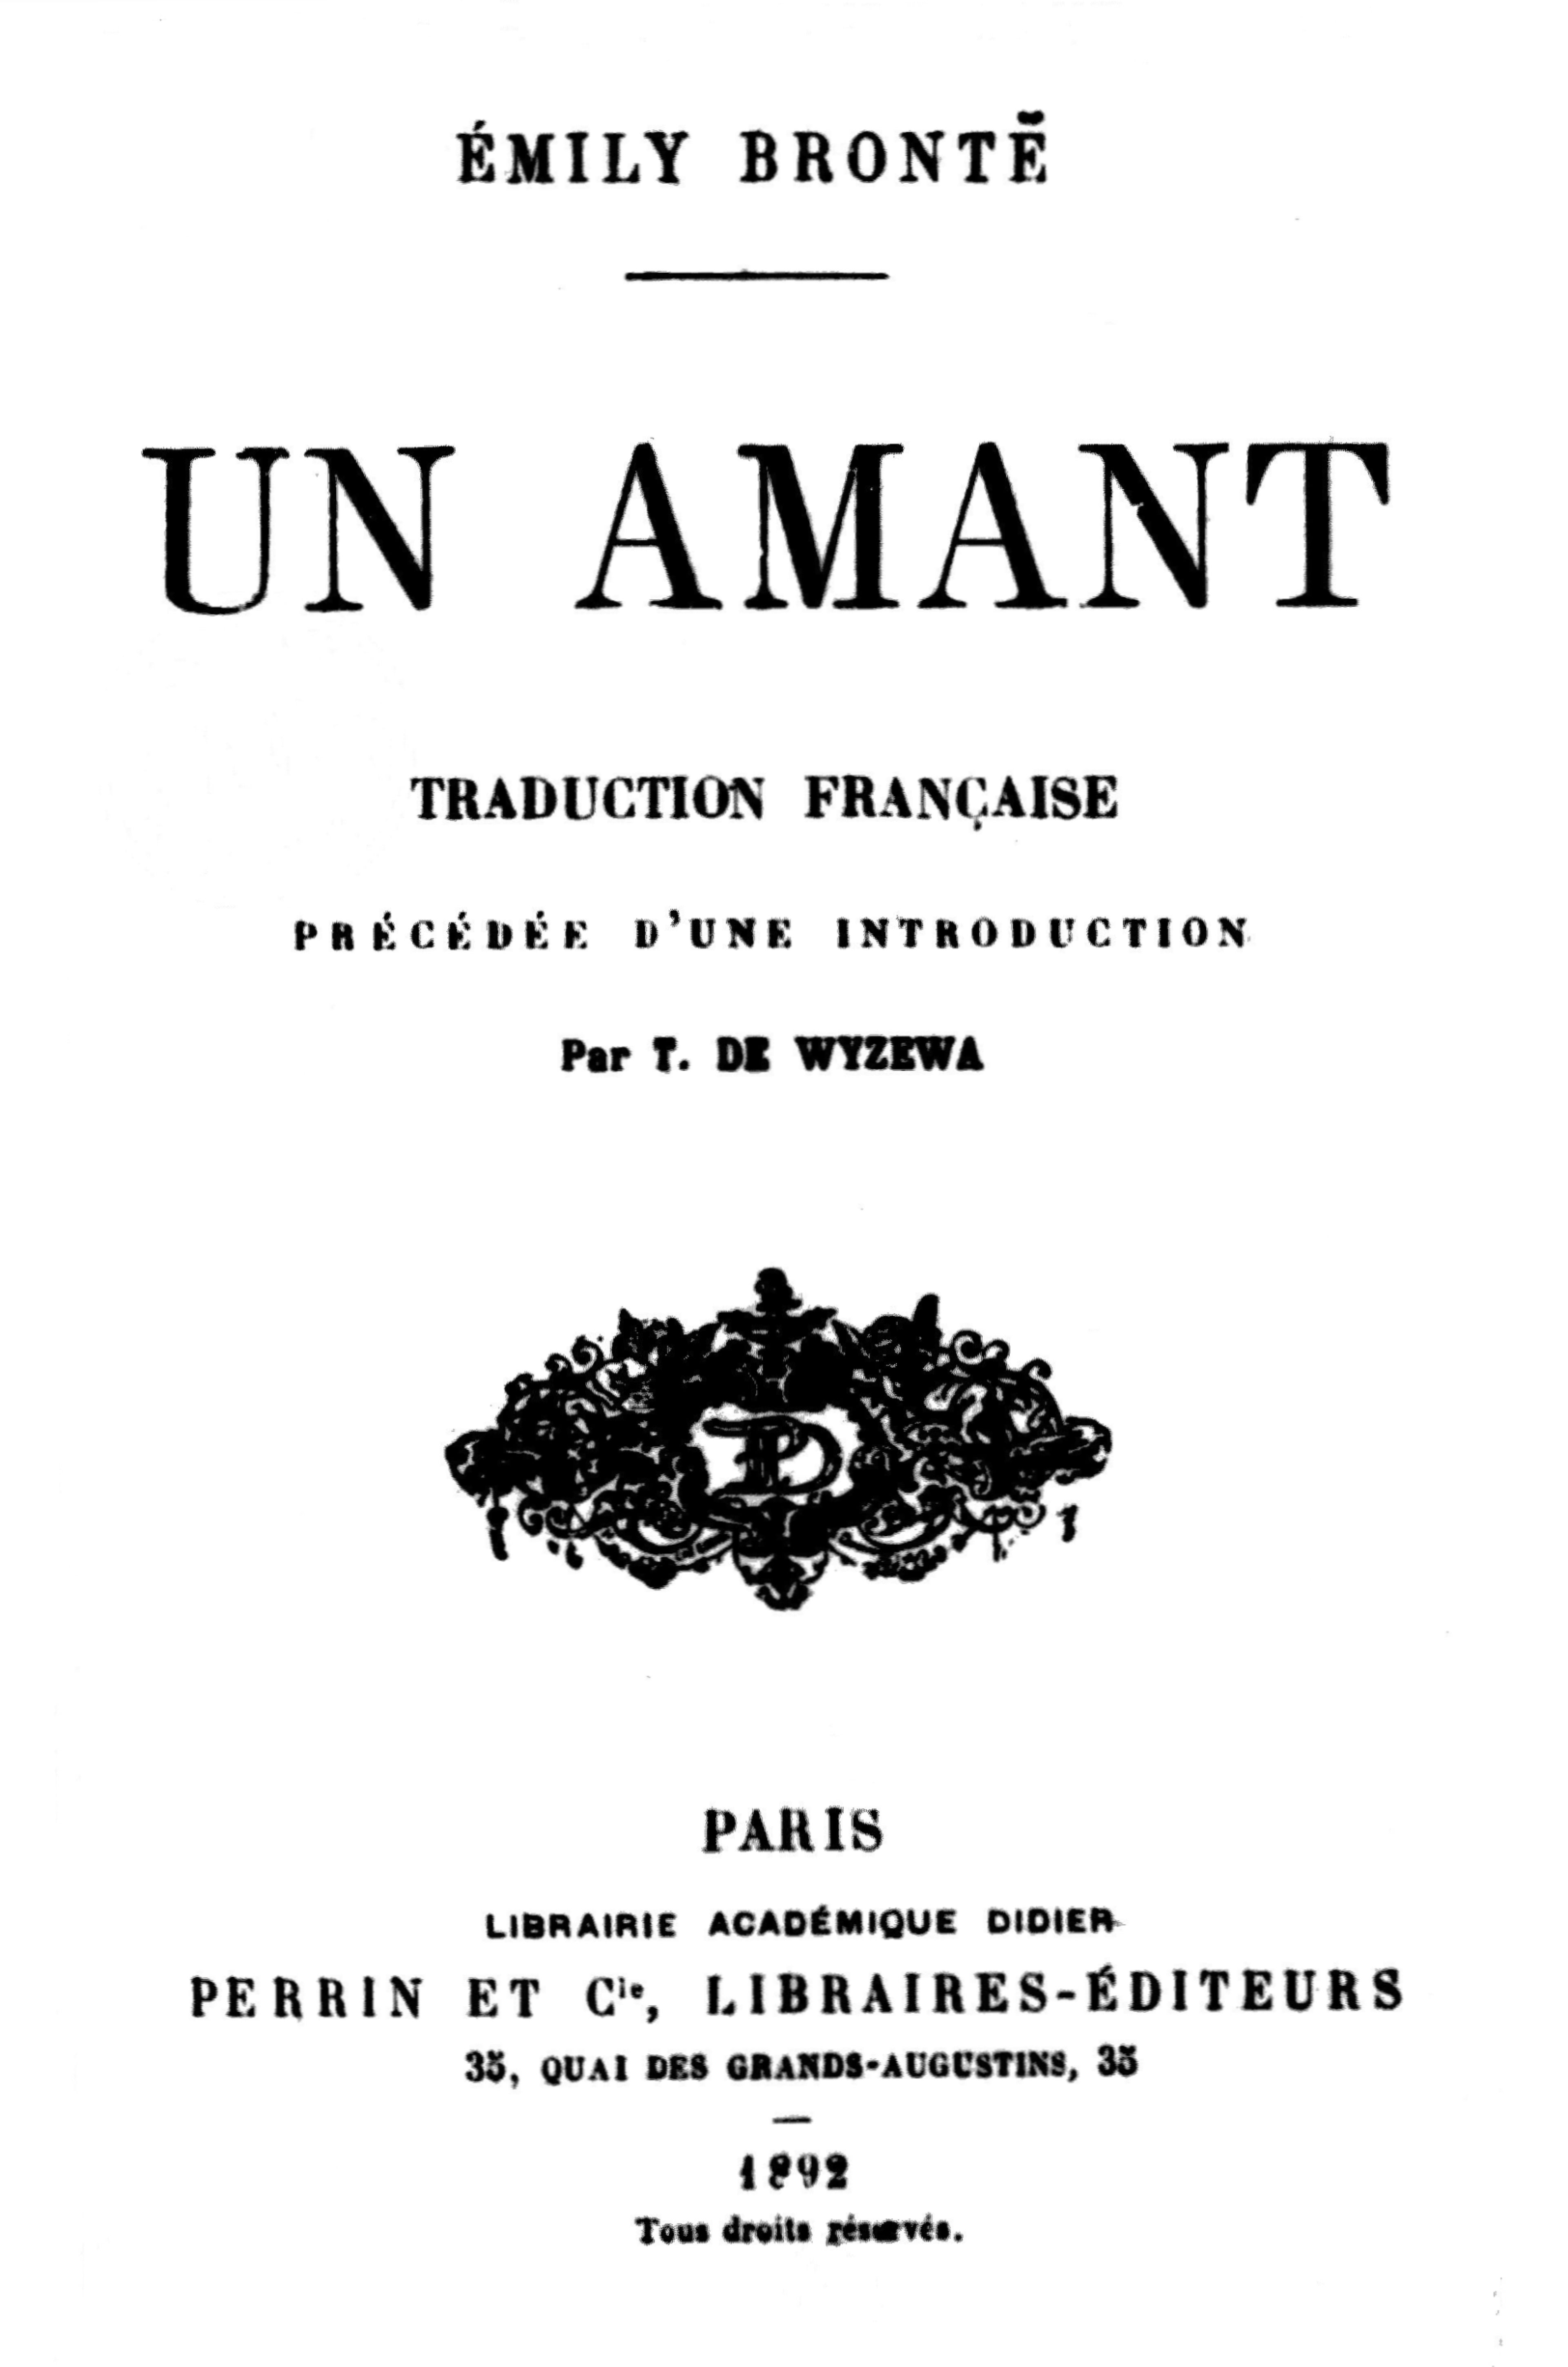 The Project Gutenberg eBook of Un amant, by Emily Brontë.